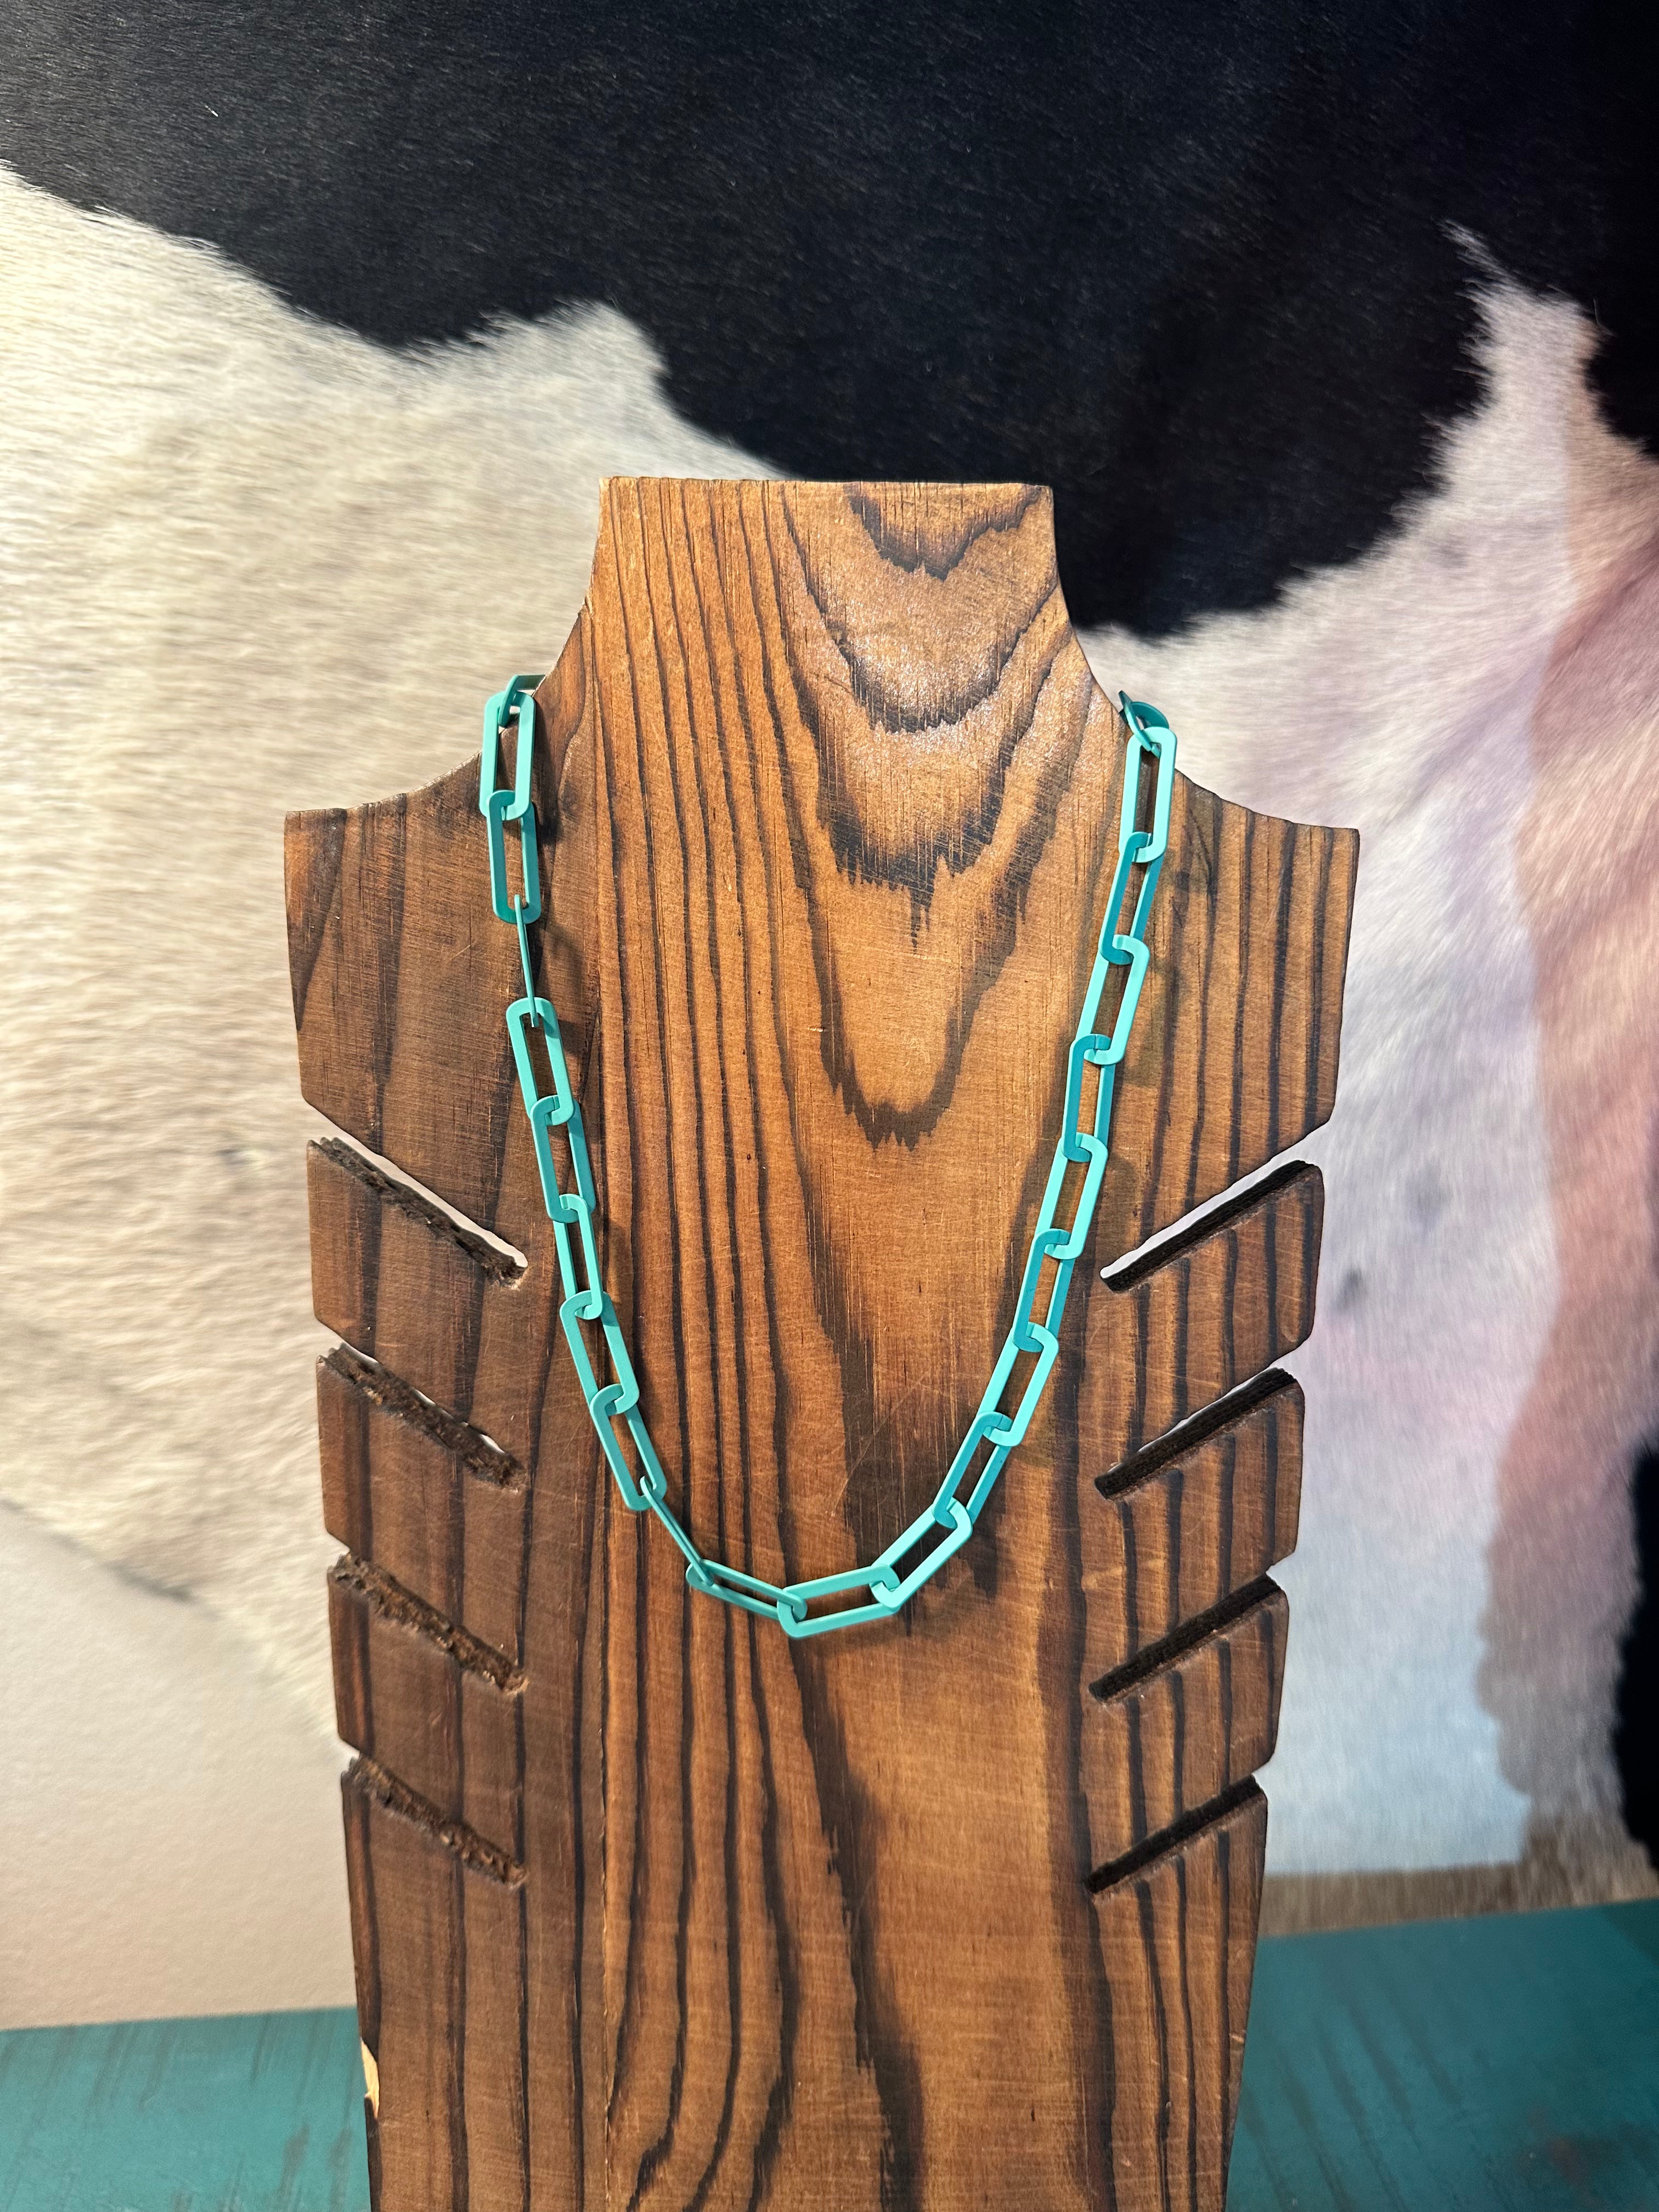 Teal Chain Fashion Necklace